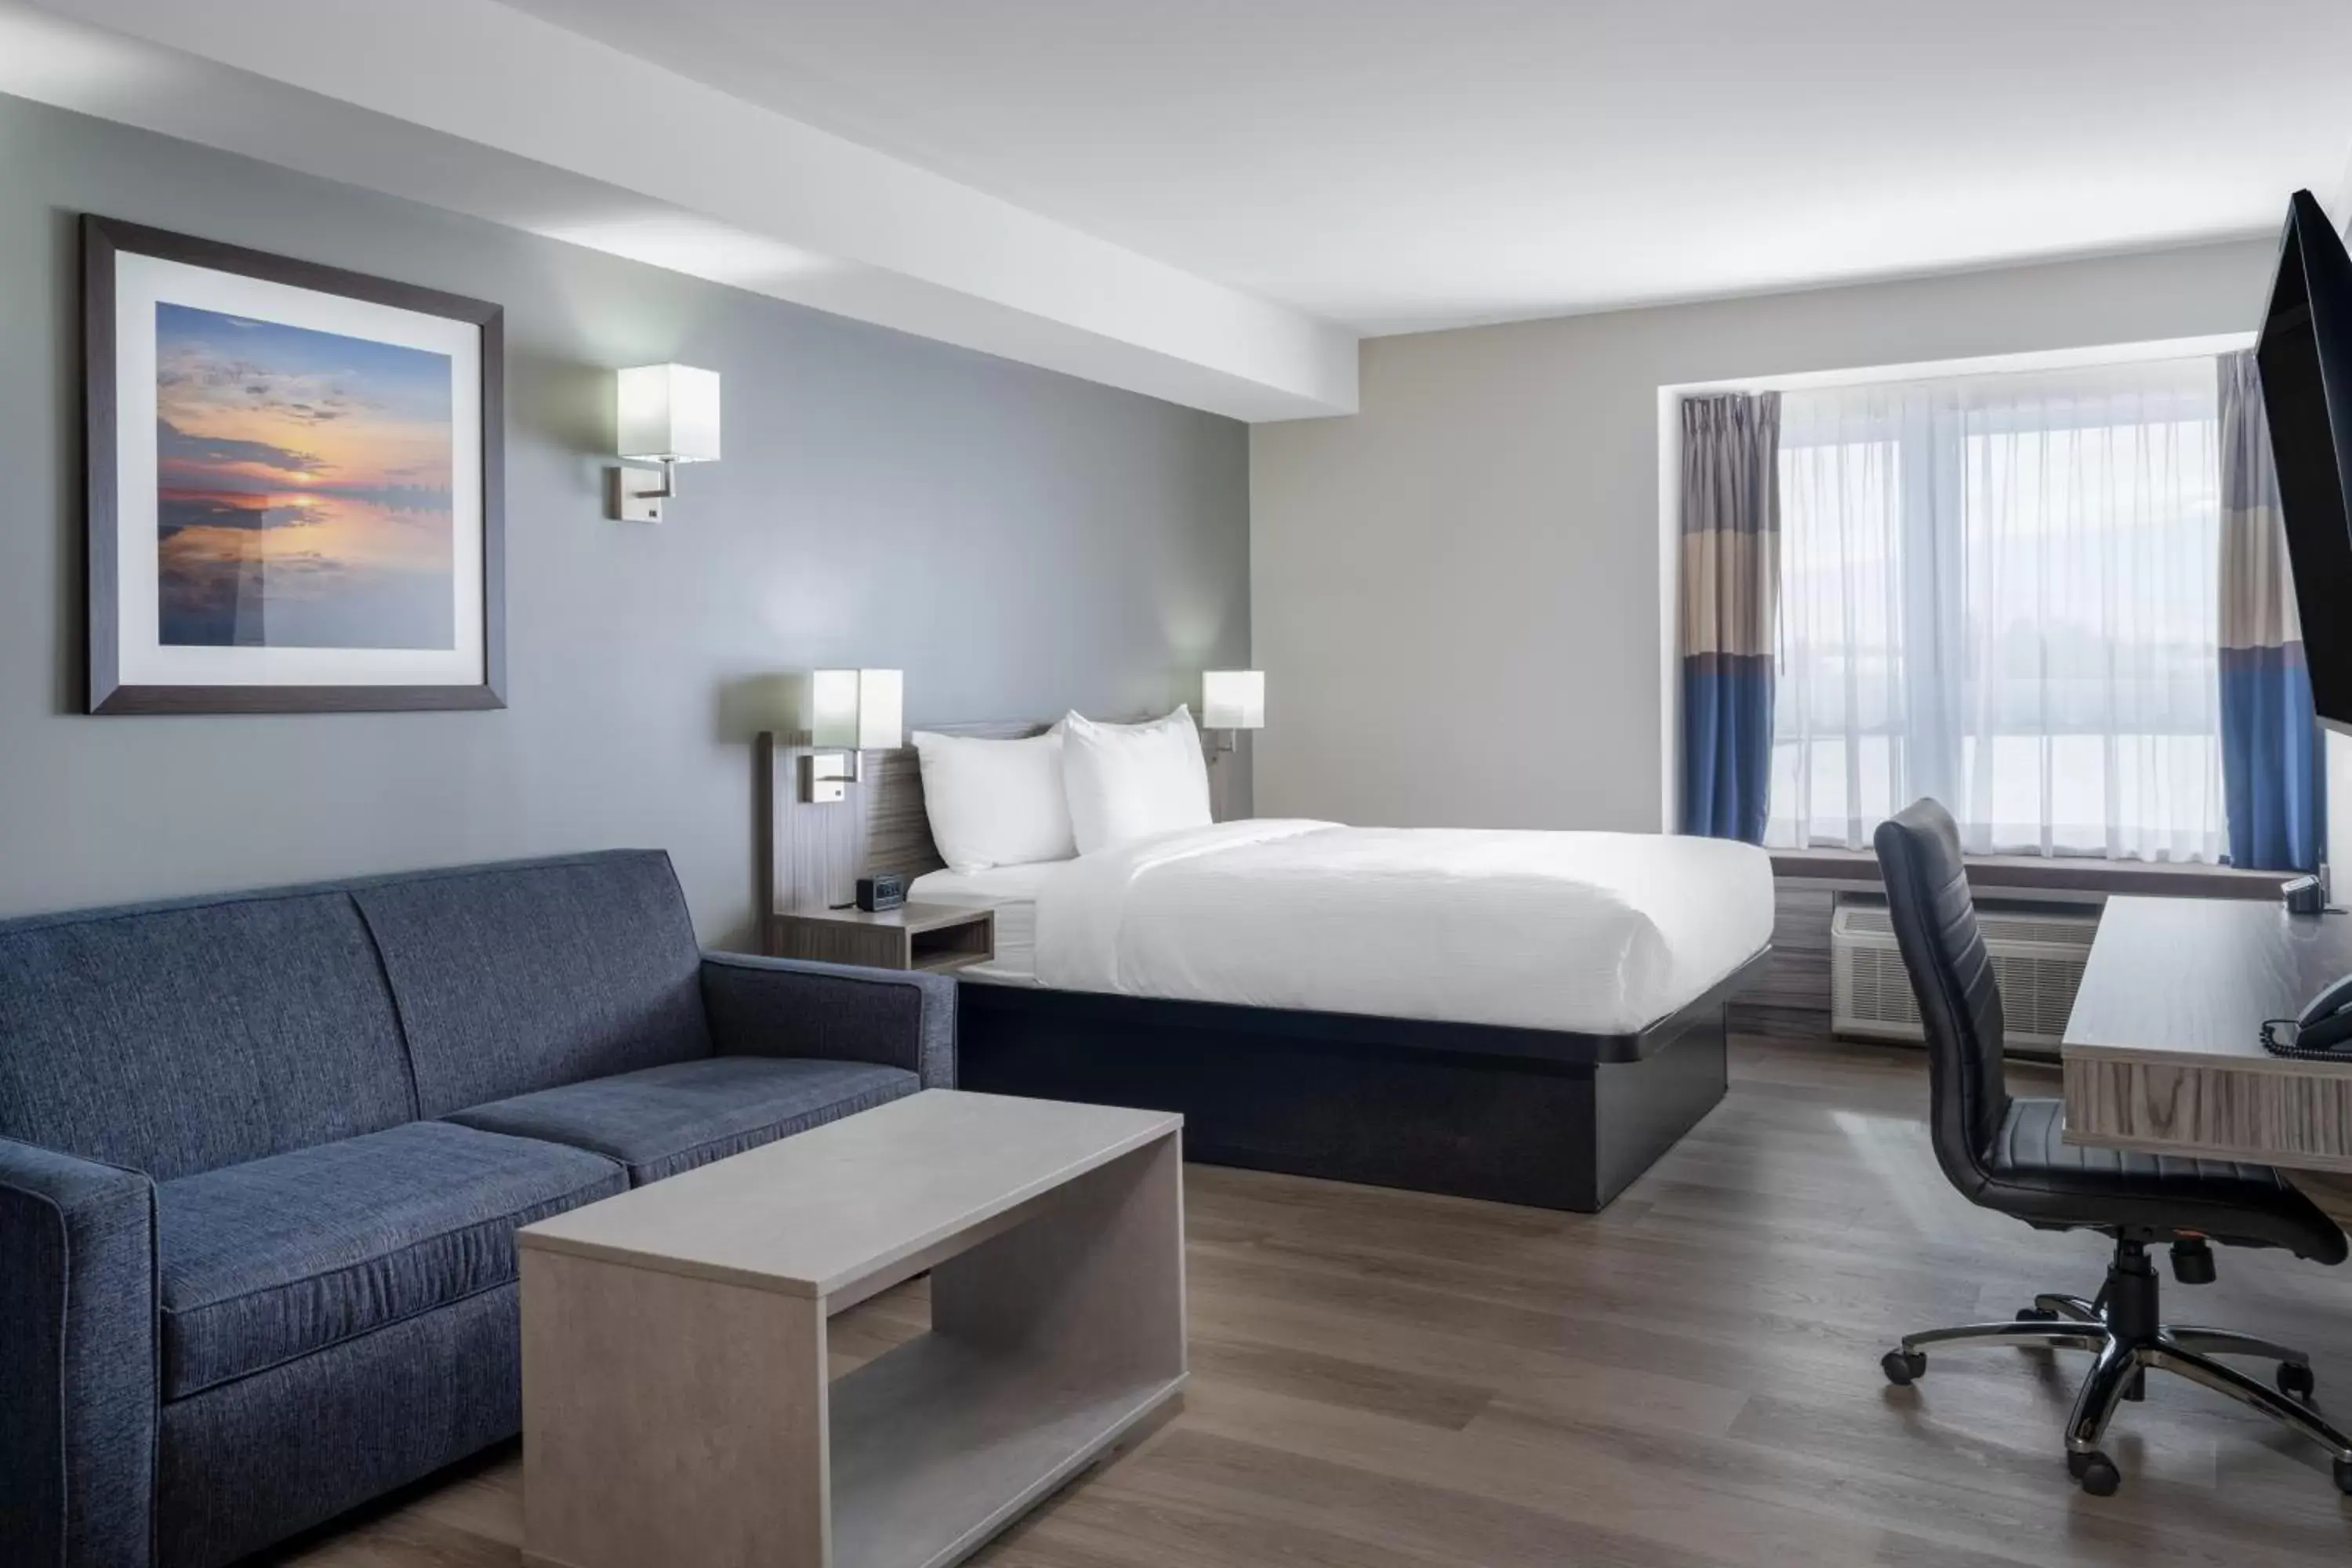 Guests in Microtel Inn & Suites by Wyndham Kanata Ottawa West